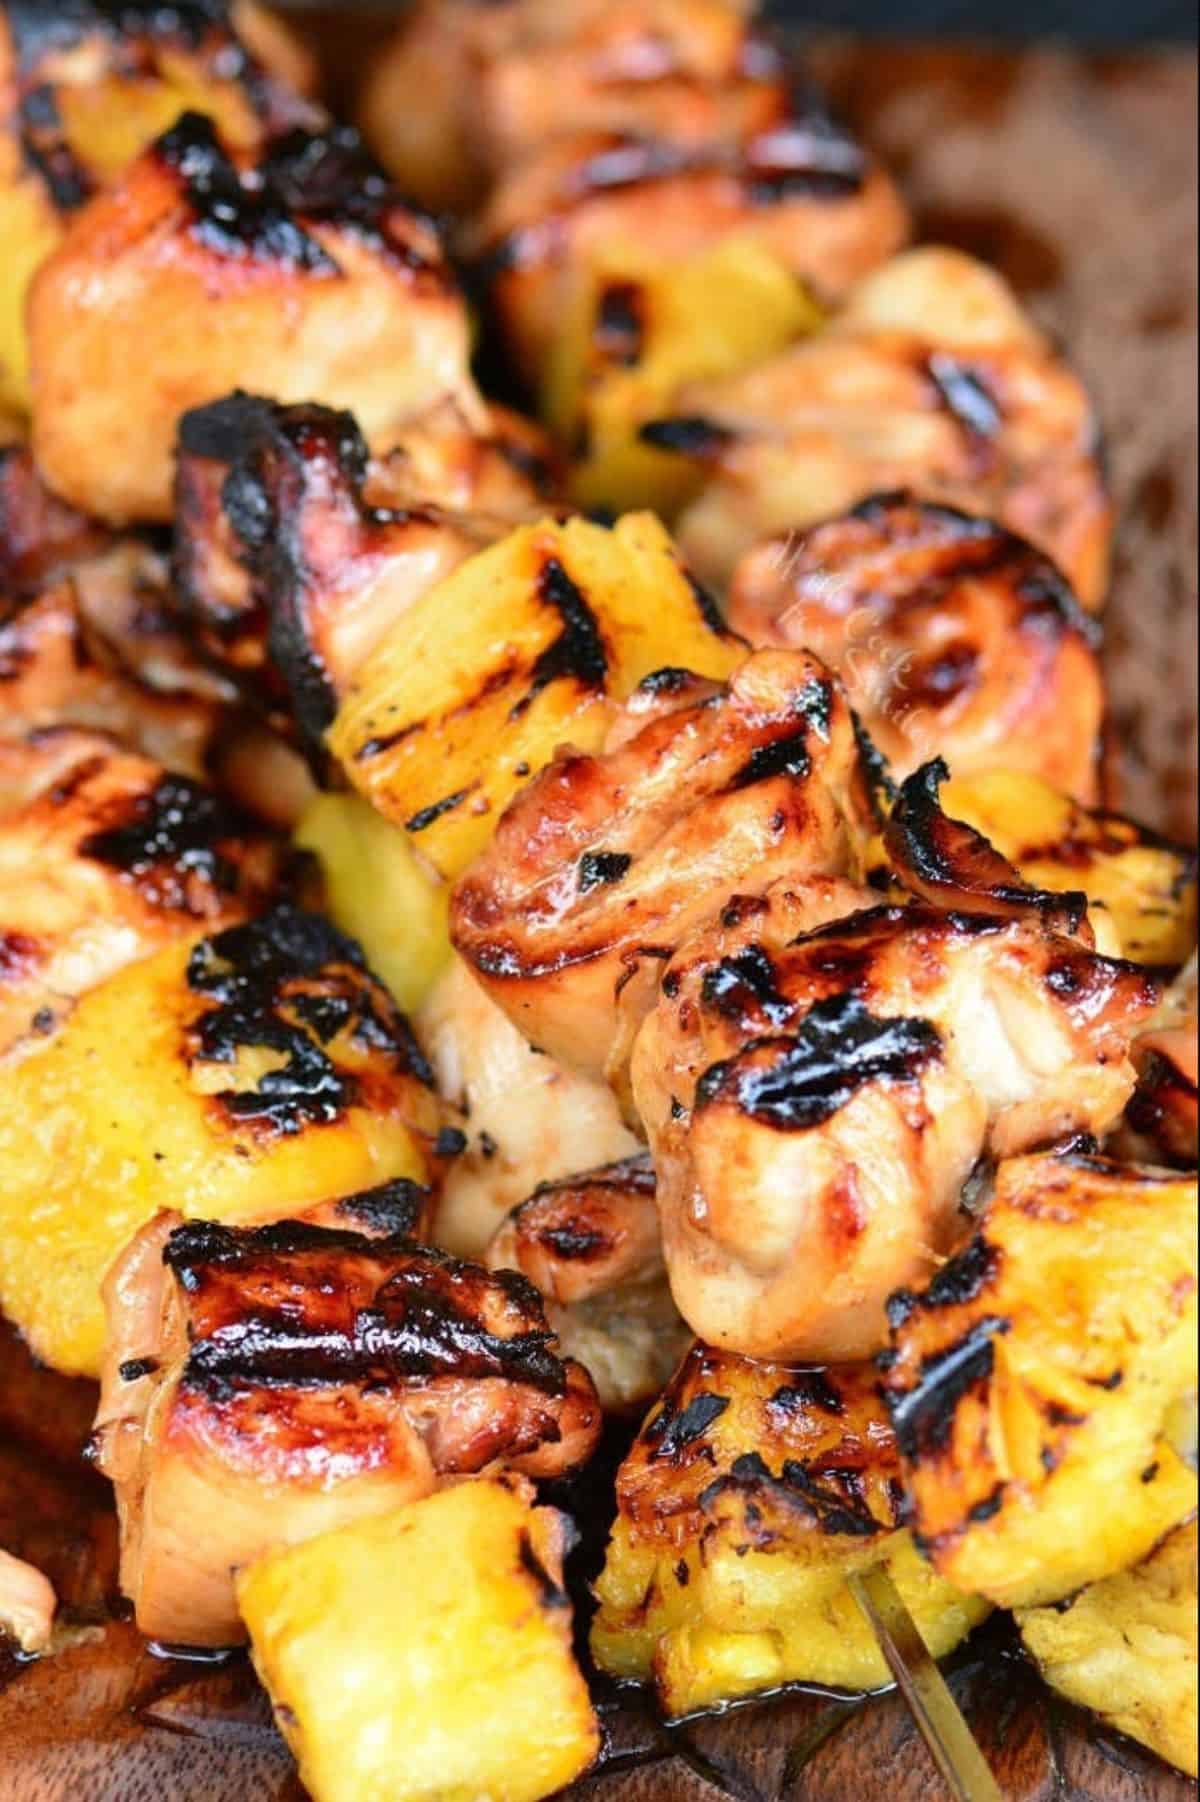 pineapple chicken kebobs are placed in a small pile on a wooden surface